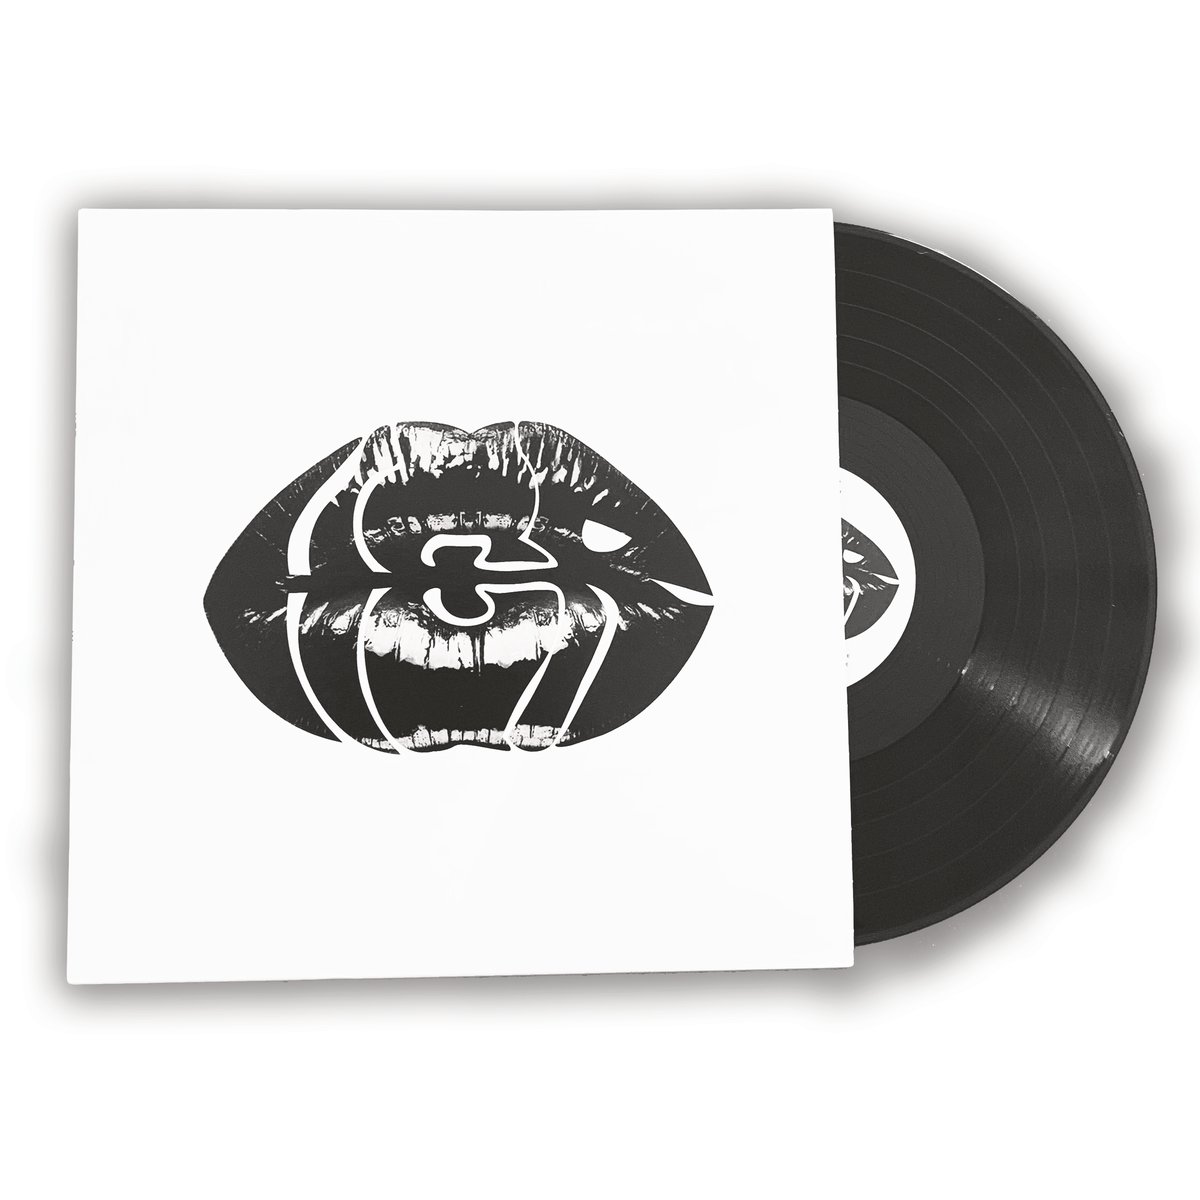 Image of Black and White LP